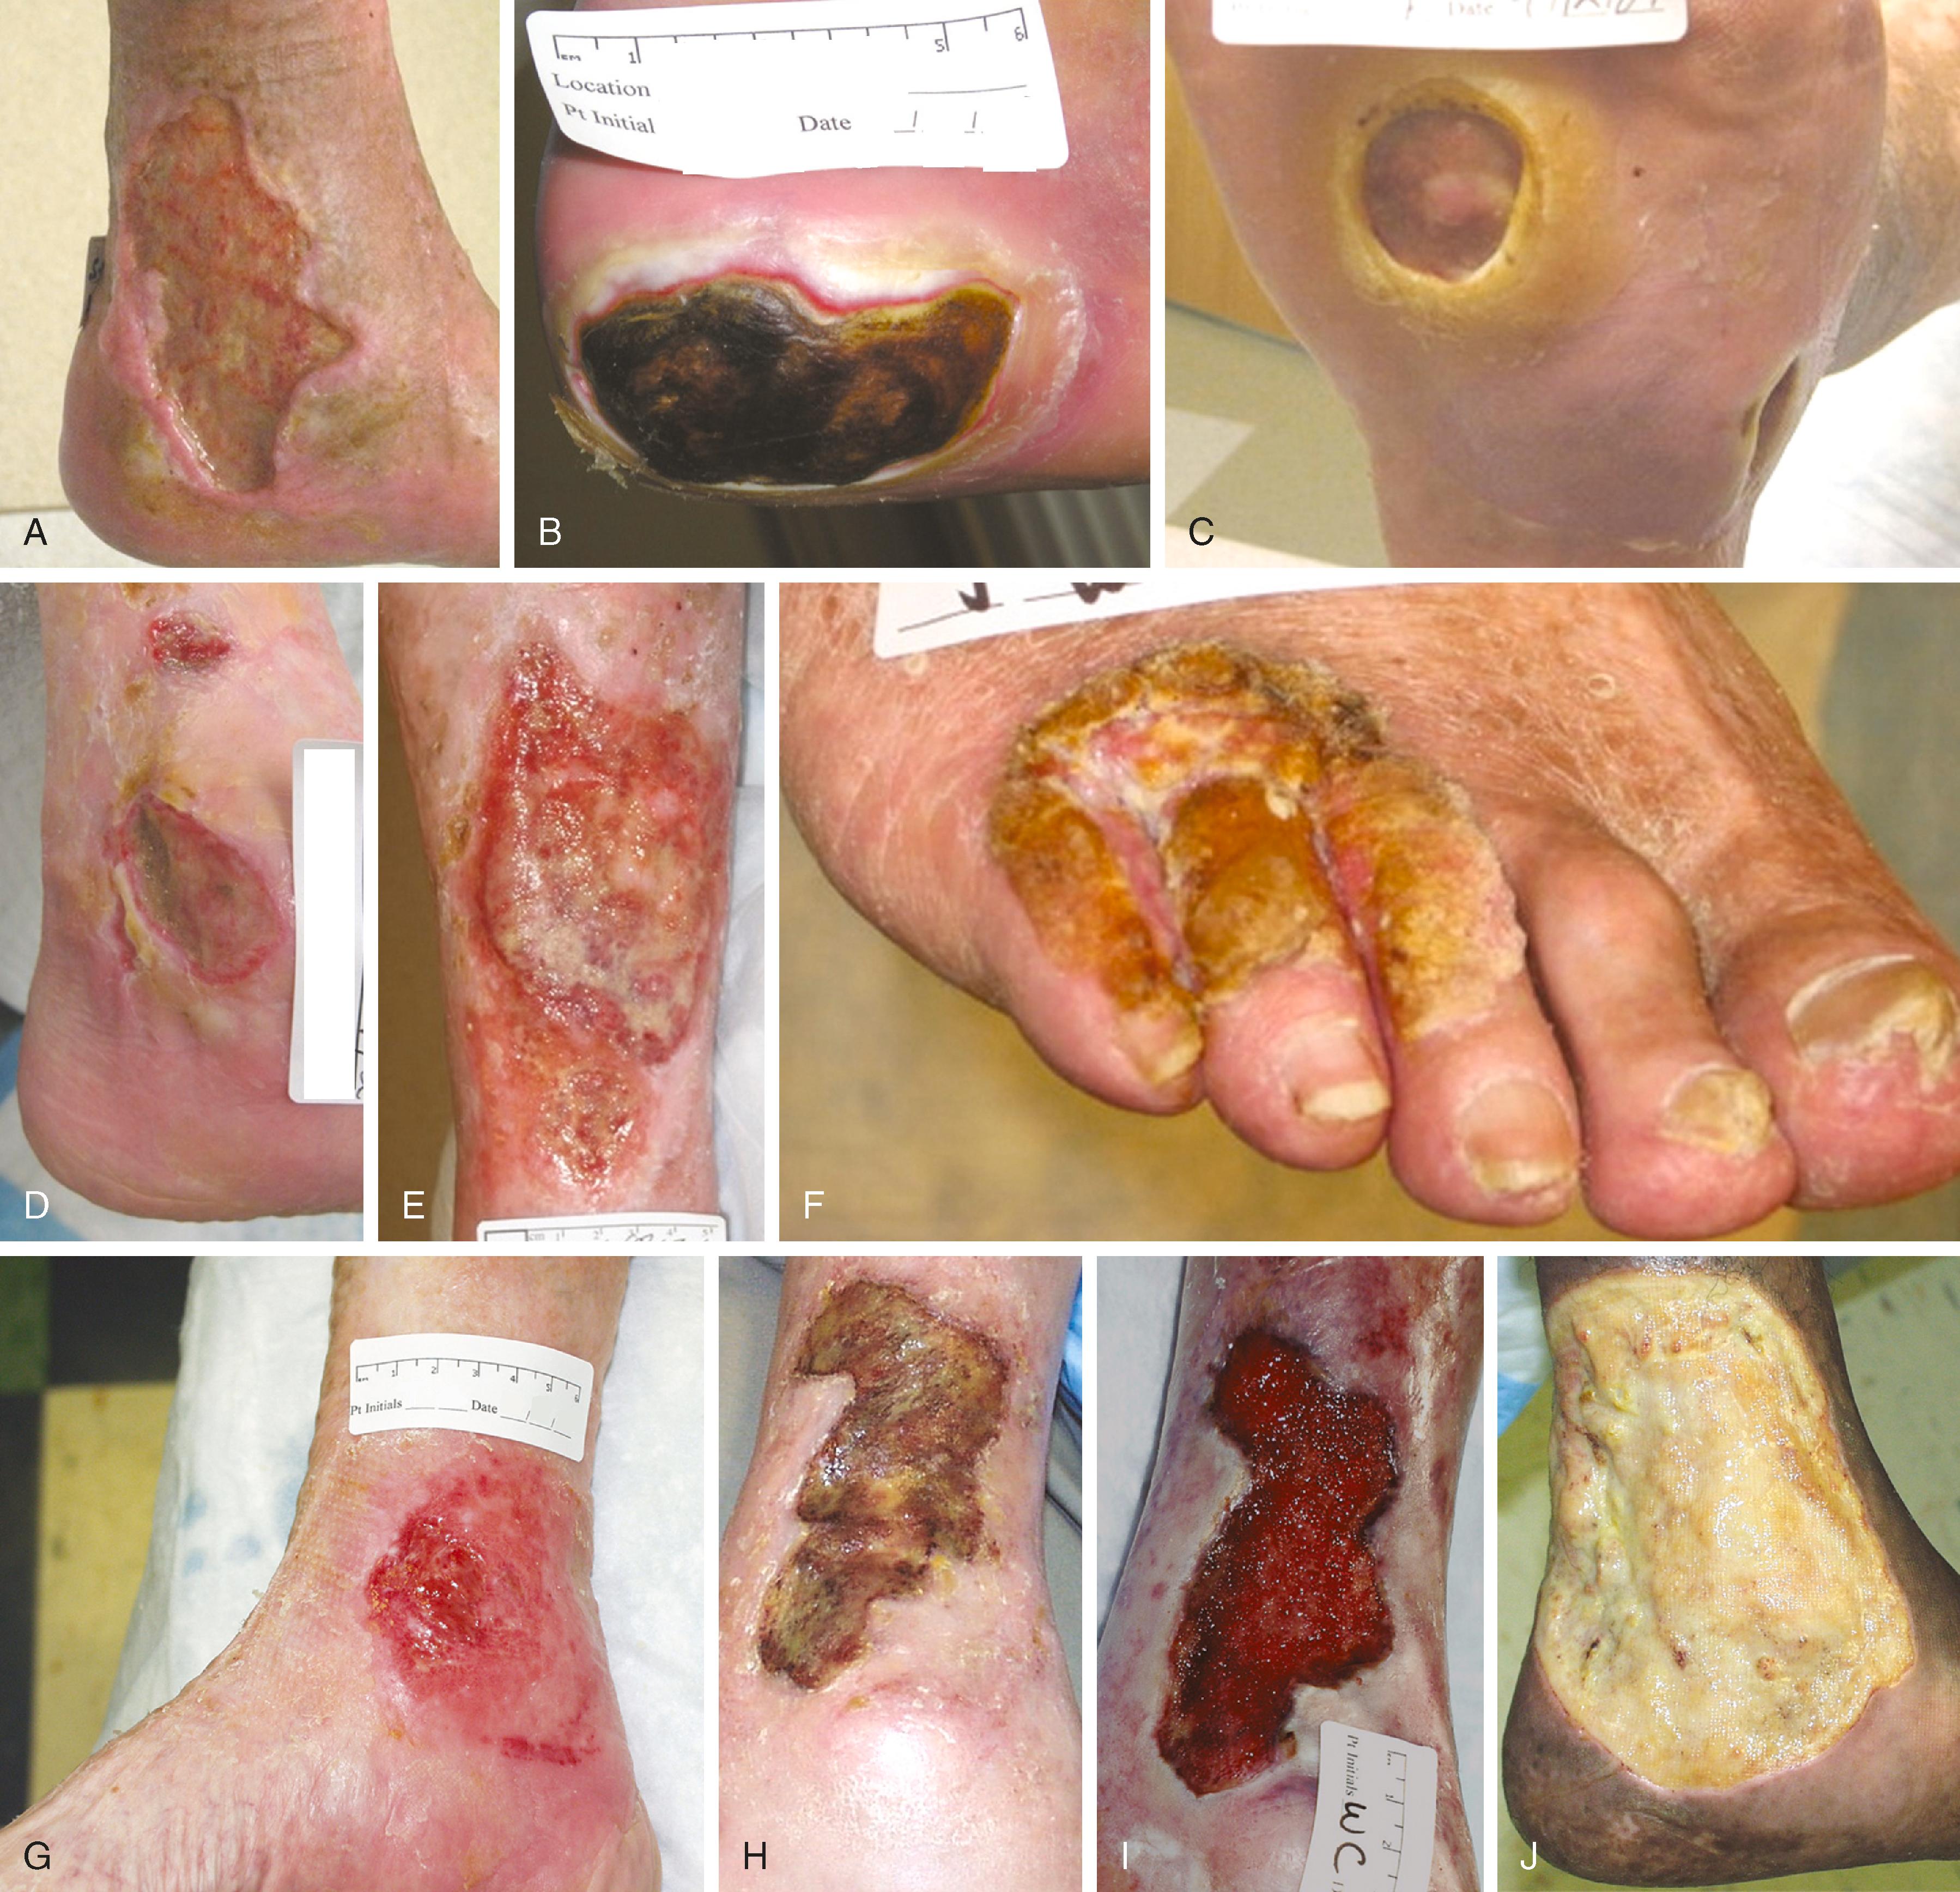 Figure 118.6, ( A ) Leg ulcer associated with chronic venous insufficiency. ( B ) Diabetic neuropathic ulcer. ( C ) Plantar ulcer in a patient with diabetes and chronic Charcot neuropathy. ( D ) Leg ulcer in a patient with both arterial and venous insufficiency. ( E ) Leg ulcer in a patient with systemic lupus and venous insufficiency. ( F ) Squamous cell carcinoma arising in a chronic foot ulcer. ( G ) Leg ulcer associated with rheumatoid arthritis. ( H ) Bacterial biofilm covering the surface of a nonhealing venous leg ulcer. ( I ) Same ulcer depicted in ( H ) after elimination of the biofilm following debridement and 2 weeks of antibiotic therapy. ( J ) Chronic leg ulcer in a patient with sickle cell anemia.